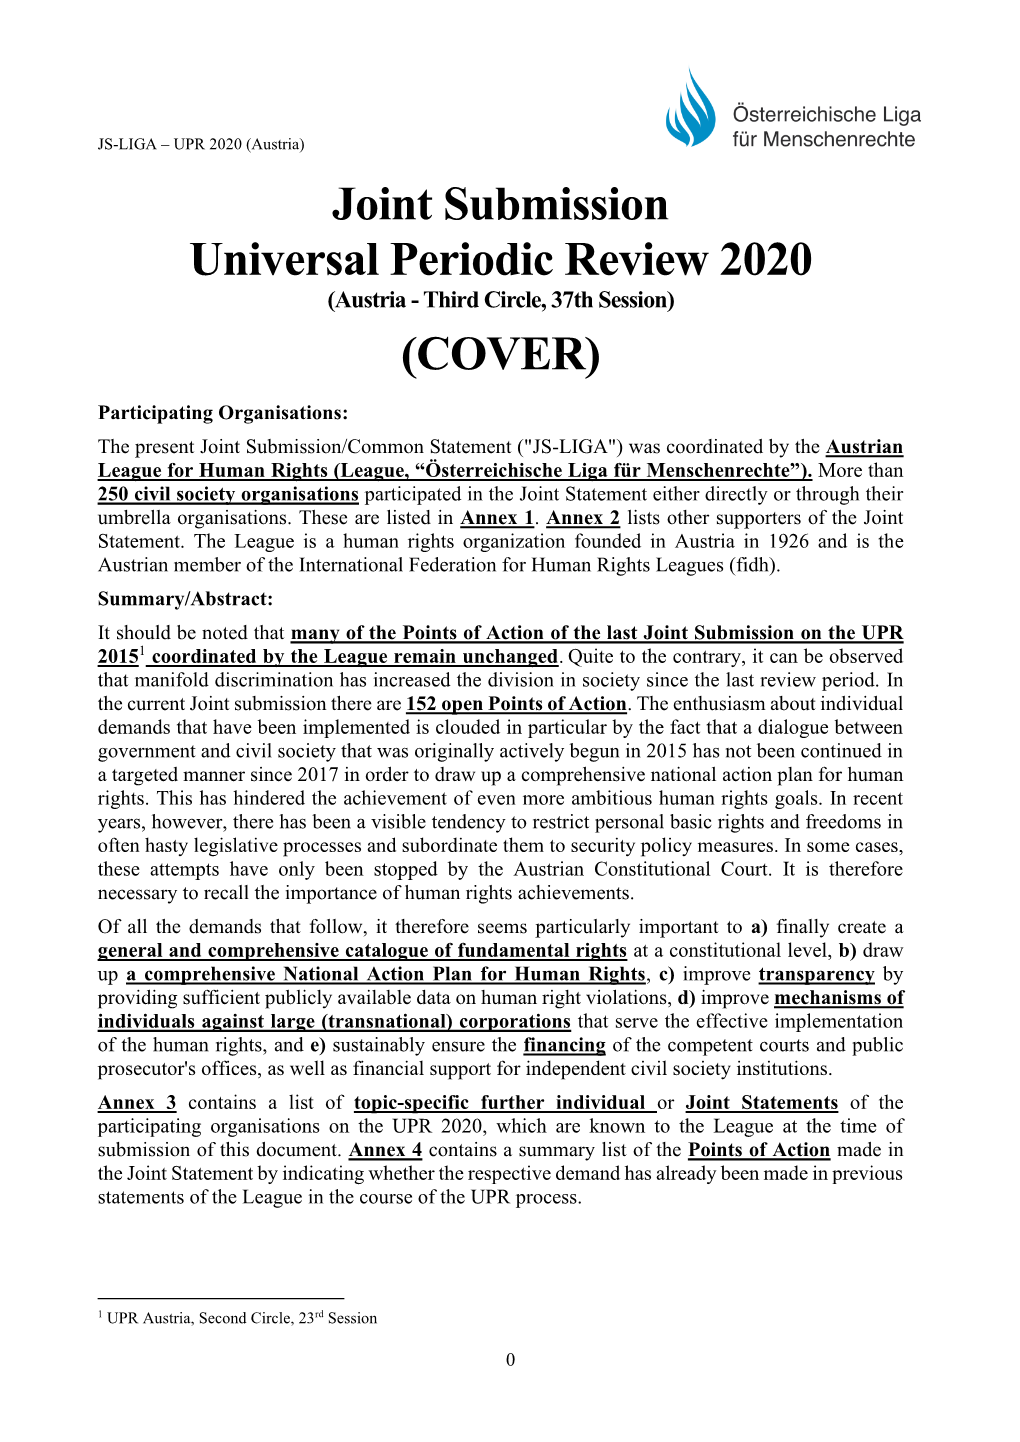 Joint Submission Universal Periodic Review 2020 (Austria - Third Circle, 37Th Session)